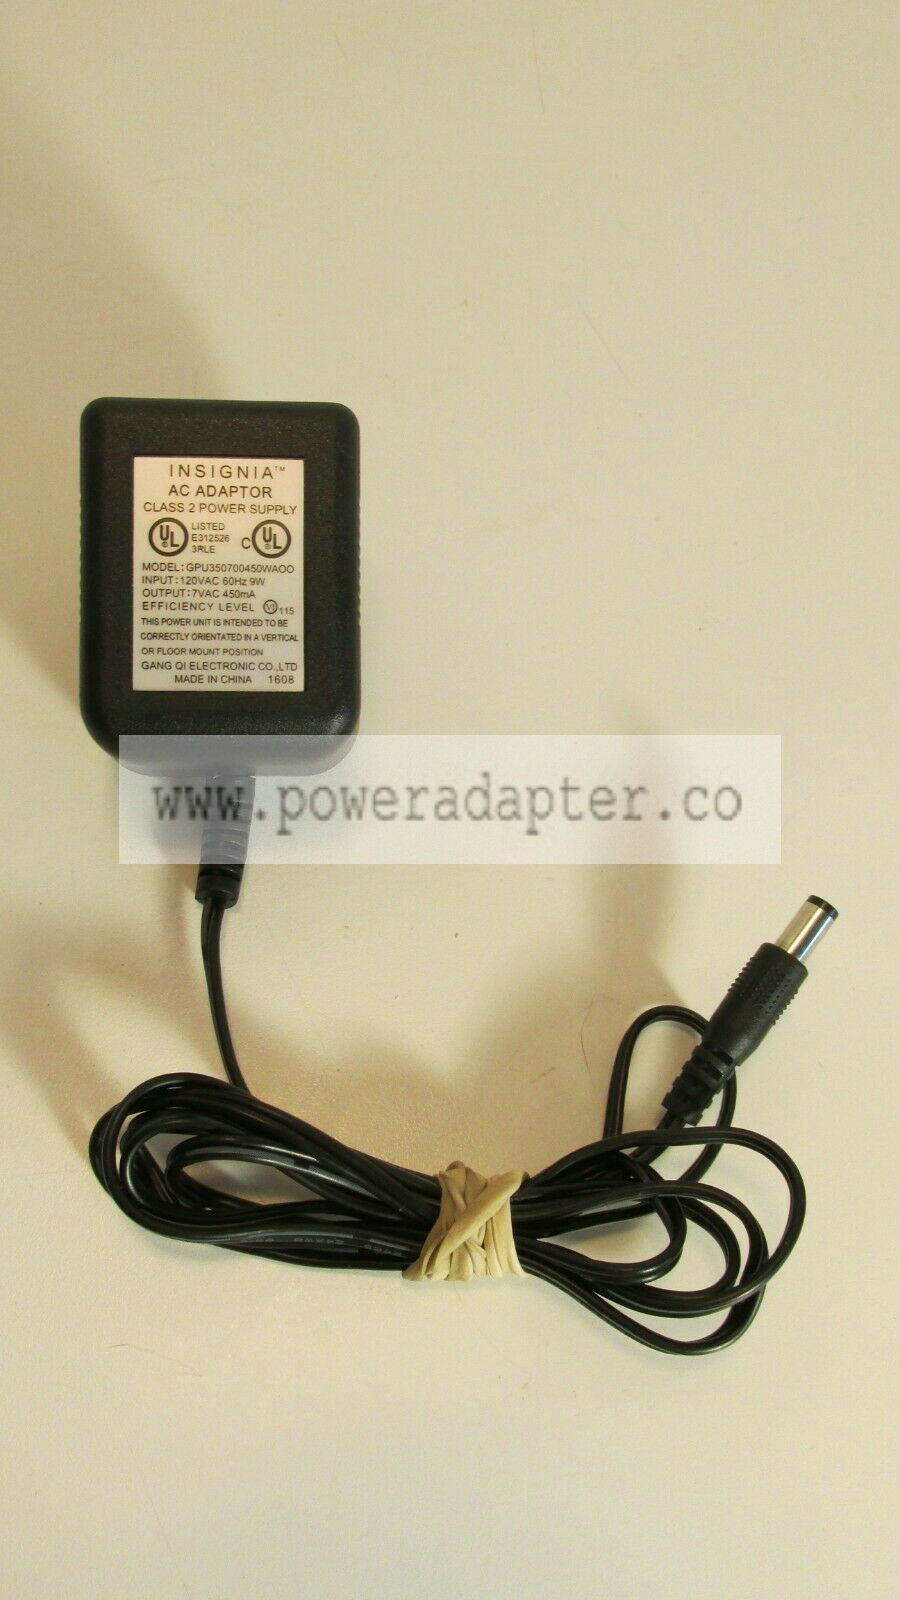 Insignia GPU350700450WAOO Power Supply Adapter Charger AC 7V 450mA TESTED Brand: Insignia Output Voltage: 7 V Model: